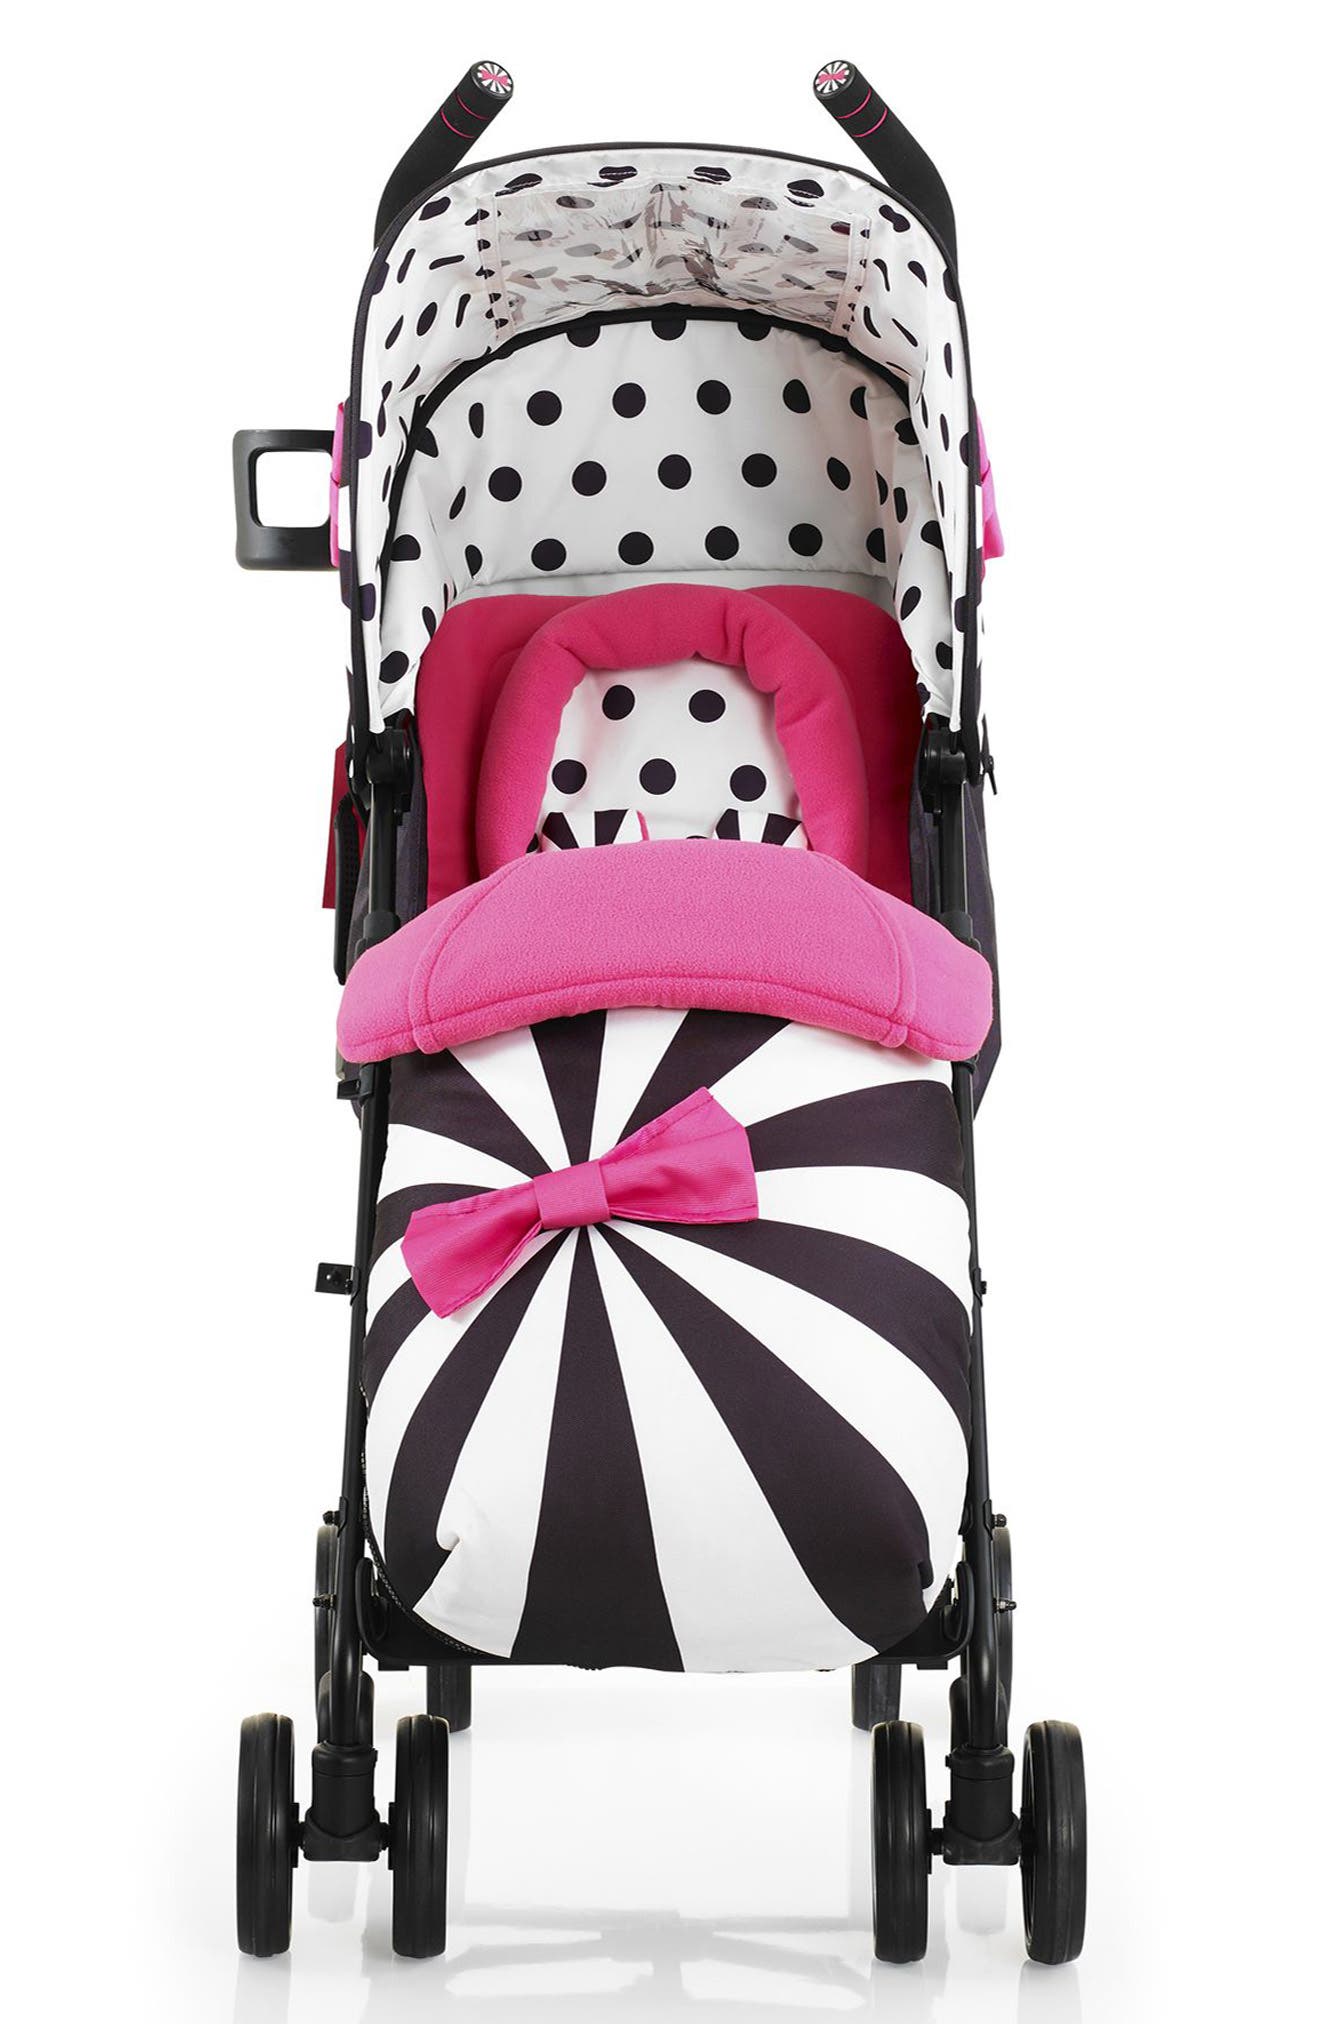 cosatto stroller clearance